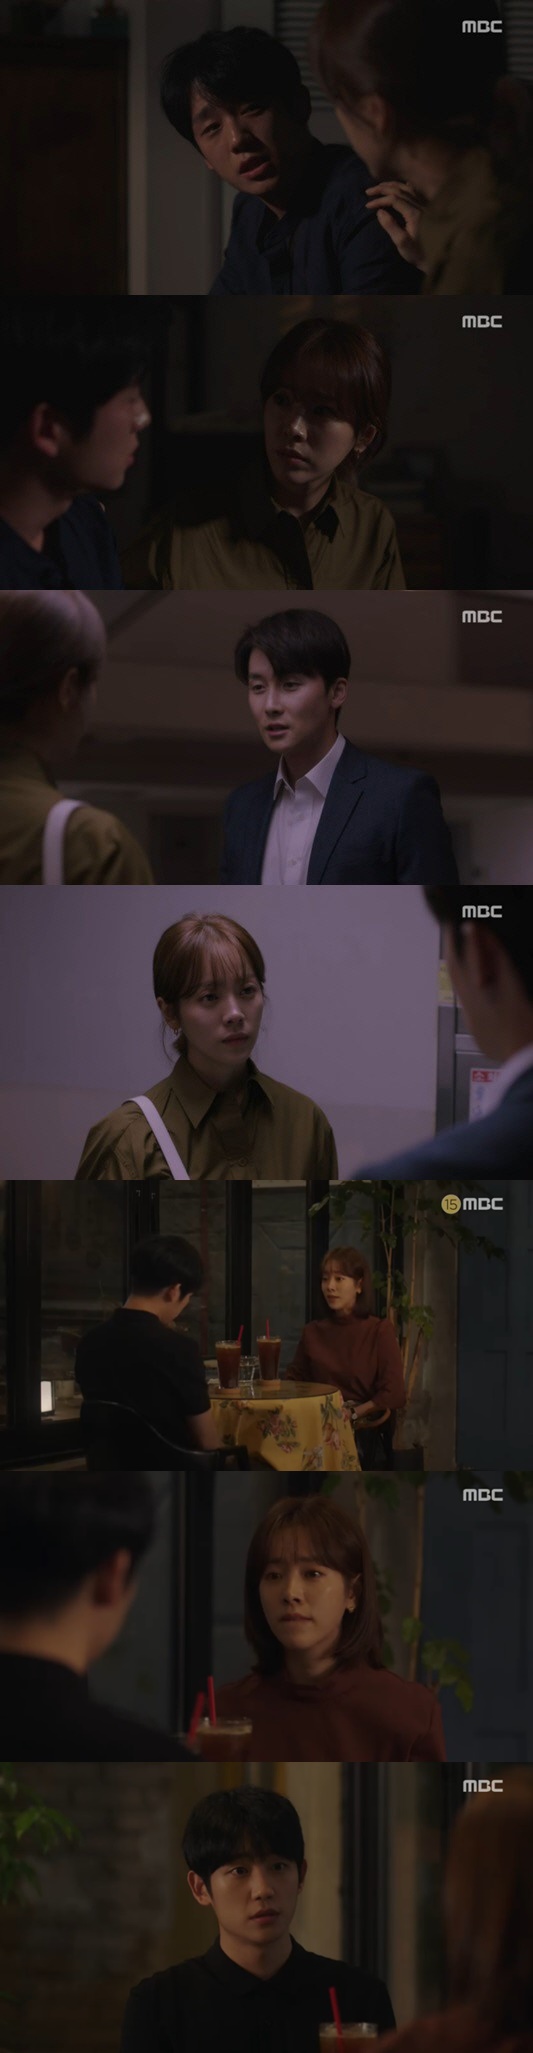 Han Ji-min, who hinted at a spring night breakup, has returned to Jung Hae-in.In the MBC drama Spring Night, which was broadcast on the afternoon of the 10th, Lee Choi Jung-in (Han Ji-min), who returns to Yoo JiHo (Jeong Hae-in), was portrayed.Yoo JiHo suddenly heard about his mother, Jung Eun-woo (Hian), and eventually showed anxiety about Choi Jung-in in the spirit of alcohol.Yoo JiHo told Choi Jung-in, Are you going to abandon us? If you do, its okay. Can I trust Choi Jung-in?Are you sure youll never change? asked Lee Jung-in, embarrassed. You dont trust me now? You think Ill change? Mr. JiHo, youre so drunk.Well talk again tomorrow, he said. But Yoo JiHo left, saying, I cant answer that ... I see.Lee Choi Jung-in hurriedly left Yoo JiHos house, and Yoo JiHos friend Park Young-jae (Lee Chang-hoon) chased Lee Choi Jung-in and said, Please understand JiHo.In fact, Jung Eun-woo mother, Jung Eun-woo said, trying to explain her mother. But Choi Jung-in said, Dont tell me.I dont want to hear it, he said, avoiding the position.Lee Jung-in was confused by the sudden attitude of Yoo JiHo, when Kwon Ki-seok (Kim Jun-han) was waiting in front of Lee Chung-ins house.Can I meet again? I betrayed once, and I can meet again. Can I believe it? What do you think? asked Lee Jung-in.Kwon shook Lee Jung-in, saying, I can believe it.The next day, Yoo JiHo asked the King Hyejeong (Seo Jeong-yeon) for advice; King Hyejeong said, There is also a human figure. Dont just want to understand.It is the worst selfishness of selfishness. Yoo JiHo, who met with Choi Jung-in after work, said, No matter how drunk you are, would you think of Choi Jung-in? Im sorry.I never thought of it for a second. Choi Jung-in said, Ive never imagined it. But I asked, Are you going to throw it away?The frank feeling I received was Choi Jung-in was not the same.I didnt think that JiHos wound would be easily removed. Yoo JiHo said, Im really not a Memory. So I cant apologize or excuse.I just think Ill make a misunderstanding. He persuaded me, I can not be qualified as Choi Jung-in said. Ive dumped the guy I was seeing, so Im qualified, said Lee Jung-in, who said, Im the guy who pushed this Choi Jung-in out of my mind.Does it make sense that you suspected such a person? Confessions. Lee Jung-in said, I suspect me.I think I jumped without preparation because I was so greedy. Lee Choi Jung-in said, Not because of Mr. JiHo. I thought love would be all. But Mr. JiHos past is so strong.I still have not enough heart, he said. I need time to think, he said. Im sorry.Yoo JiHo stared at him as he tried to leave and said firmly, Ill tell you exactly what Im thinking: Dont throw us away.Yoo JiHo went to the Choi Jung-in house after breaking up with Choi Jung-in, but he took a call from Jung Eun-woo, Dad come home soon.Meanwhile, Kwon Young-guk (Kim Chang-wan) offered Kwon a position to stand. Kwon Ki-seok replied, Not yet, but there is nothing I cant meet.Shin (Gil Hae-yeon) came to Choi Jung-in and said, What if your life is so happy? There are still many mountains to overcome. Marriage is not all. Its harder.I can have a moment of regret, Lee Jung-in said. Choi Jung-in burst into tears. I know youve been suffering a lot.Im not done with my mothers permission, he said.Choi Hyun-soo (Lim Hyun-soo) called Yoo JiHo and said, Is it over with Choi Jung-in? Does Kwon Ki-seok know?Yoo JiHo asked Kwon Ki-seok, How do you disappear from this Choi Jung-in life? Kwon Ki-seok replied, If you give up, I will give up.Yoo JiHo asked, Do you think Ill meet if I give up?Kwon said, Whos meeting? You know. My goal is Yoo JiHo. Choi Jung-in comes. Were married. Parents are waiting.You dont know Choi Jung-in. You cant handle it. Your cheap romance doesnt fit this Choi Jung-in. Youre unscrupulous.This Choi Jung-in made me do this. Im this bad. Im sorry. You can see the future.Yoo JiHo said, If you are really worried, I will be grateful. I am not warning you from now on. It is a threat. He said, If you are a good head, I will remember.Im telling you, if its a child, theres nothing to be afraid of. Whats the film about me and my son, Illegal?He even said that his father shot it, he said, referring to a picture of Jung Eun-woo (Highian) taken by Kwon Ki-seok and Kwon Young-guk as Illegal.Ive been patient with Mr. Choi Jung-in. Theres nothing to be afraid of. Im afraid youve touched my child.Kwon Ki-seok left the table and made a meal with Kwon Young-guk and Lee Tae-hak (Song Seung-hwan). Kwon Ki-seok asked Kwon Young-guk to take the position of Lee Tae-hak as director.When Yoo JiHo returned to the pharmacy, Lee Jung-in was waiting.Lee Jung-in was angry, saying, I want to squeeze one and give me the medicine I want to eat when I feel sick. Yoo JiHo kissed him like that.On the other hand, Spring Night is broadcast every Wednesday and Thursday at 10 pm.Photo  MBC Broadcasting Screen